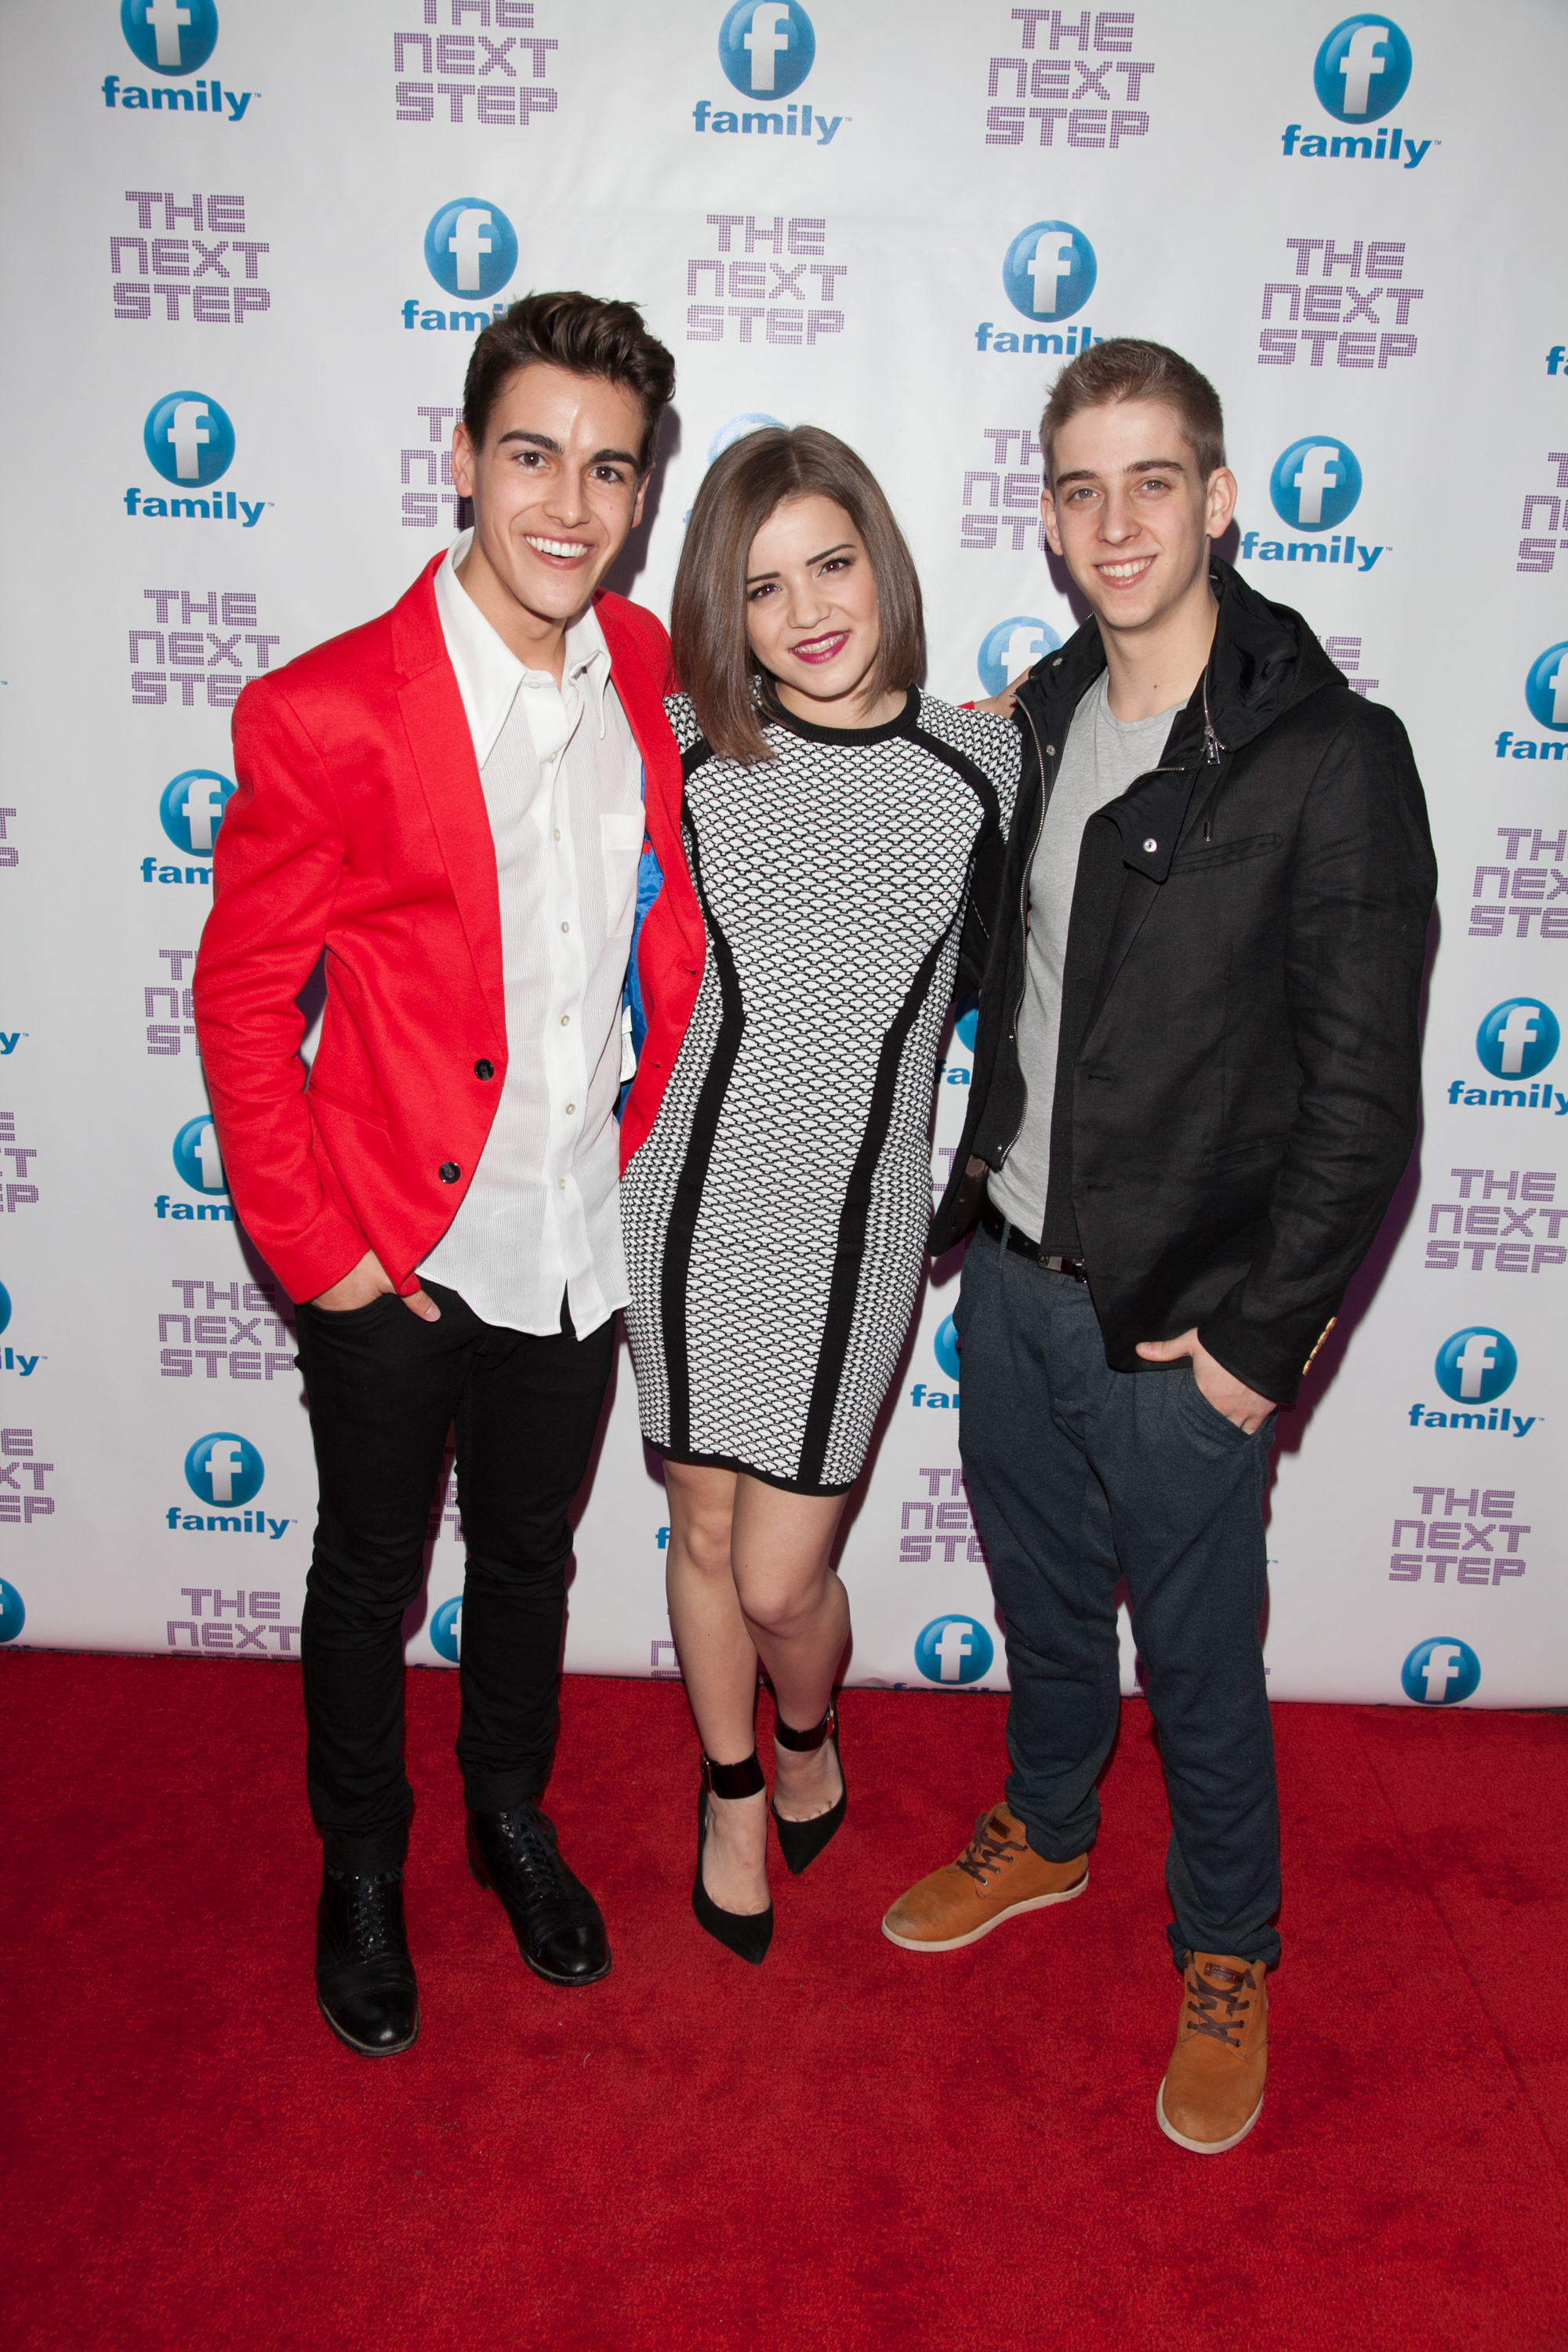 Isaac Lupien, Brennan Clost and Brittany Raymond at event of The Next Step (2013)